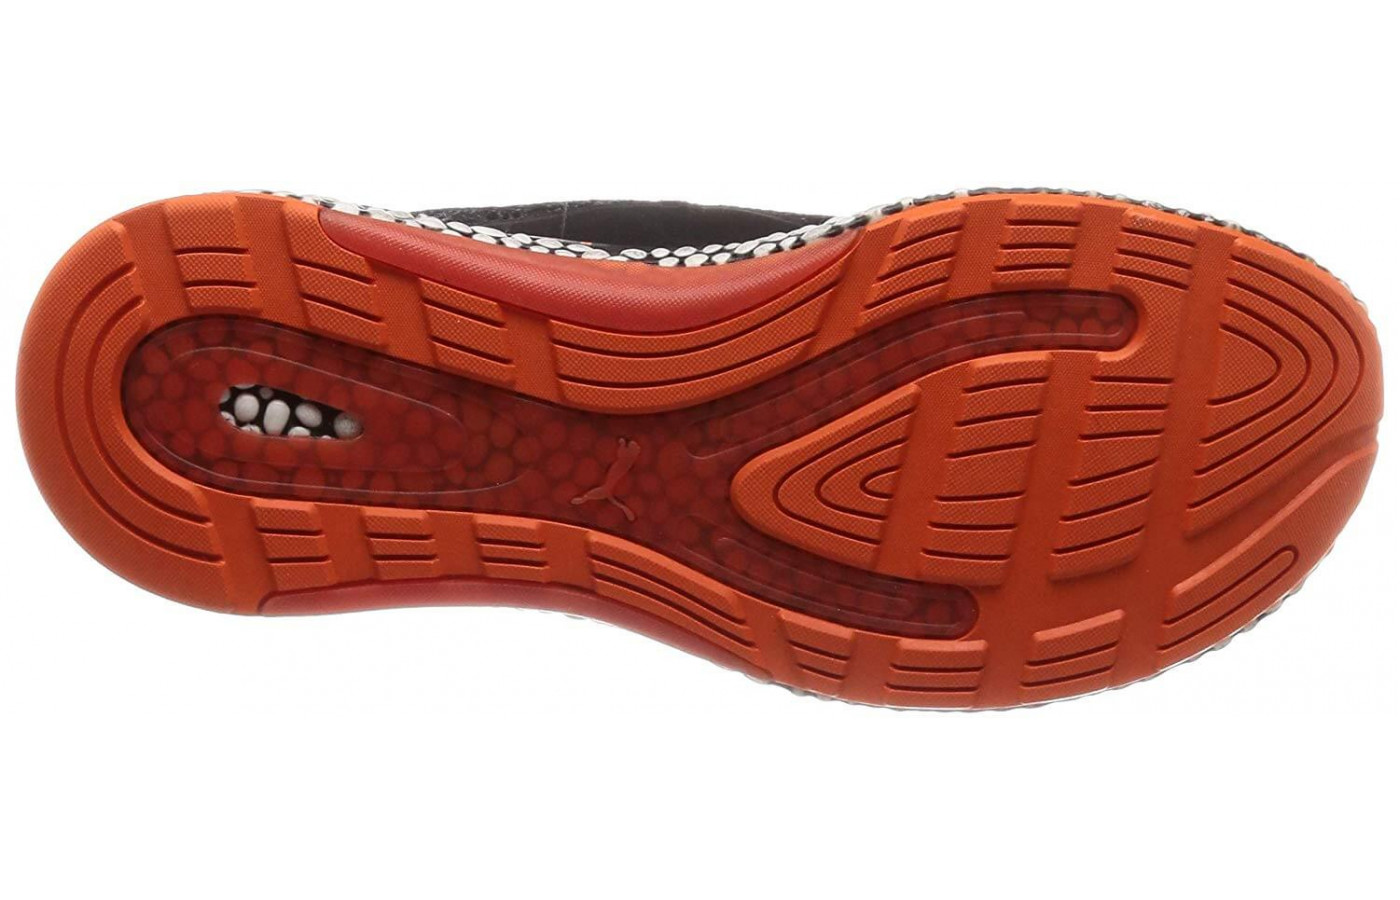 The Hybrid Runner's outsole is made from a simple rubber compound